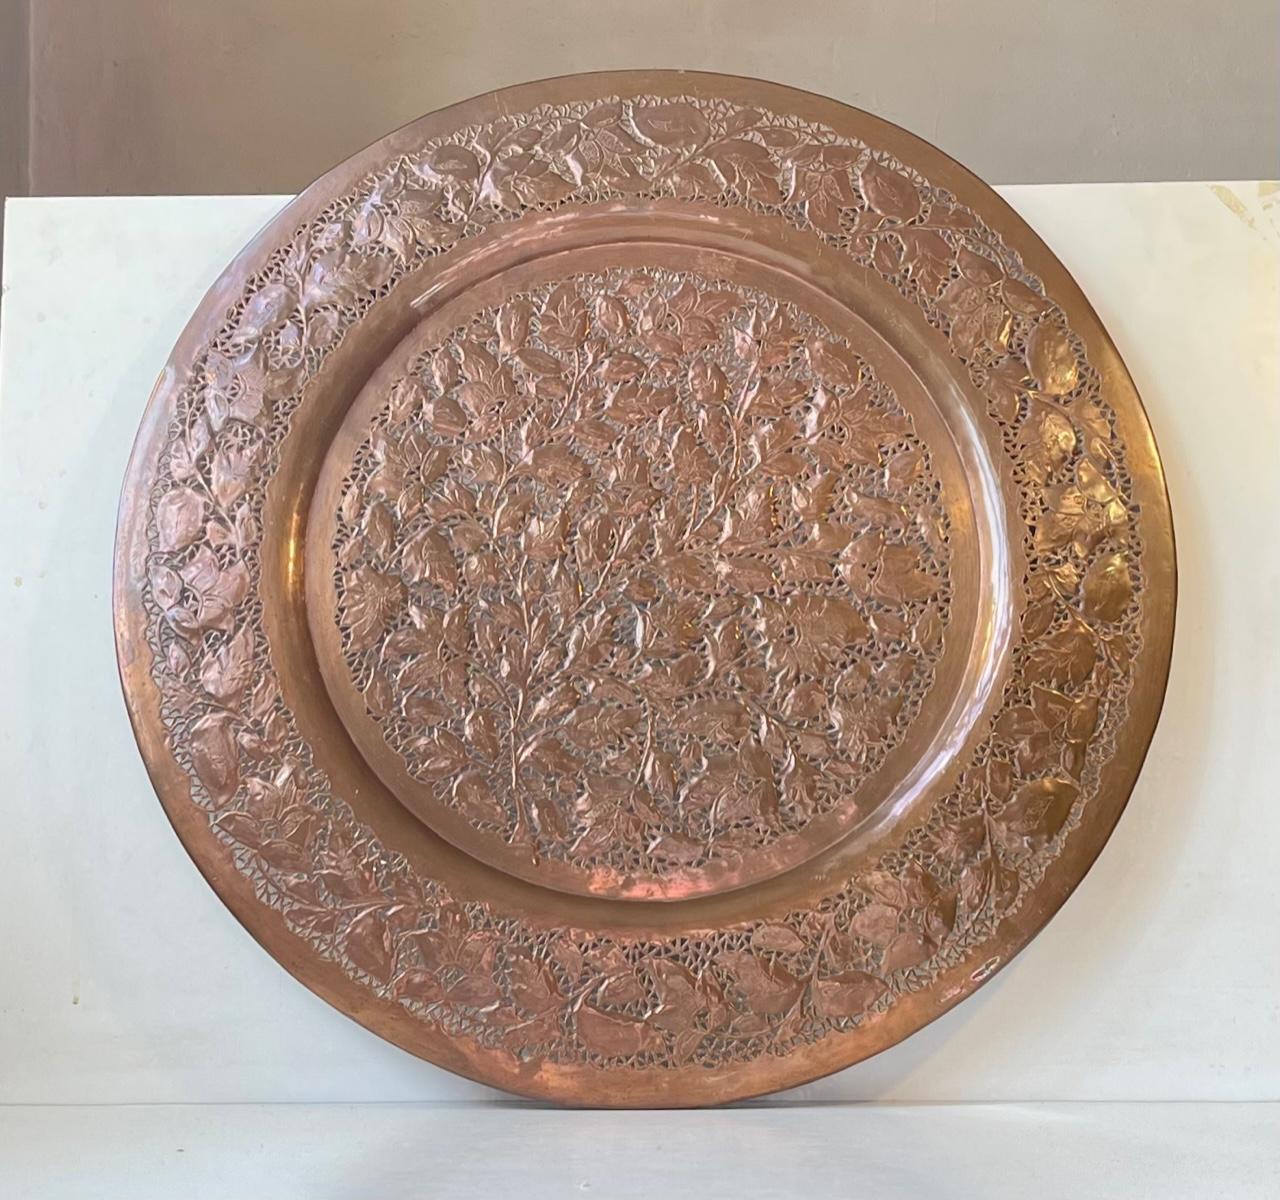 Extra-large (57 cm) Persian copper tray decorated with leaves and flowers with intricate perforations. It was made in Pakistan or India during the 1960s or earlier. It can be used as a tray for serving and can be wall hung for display via a brass